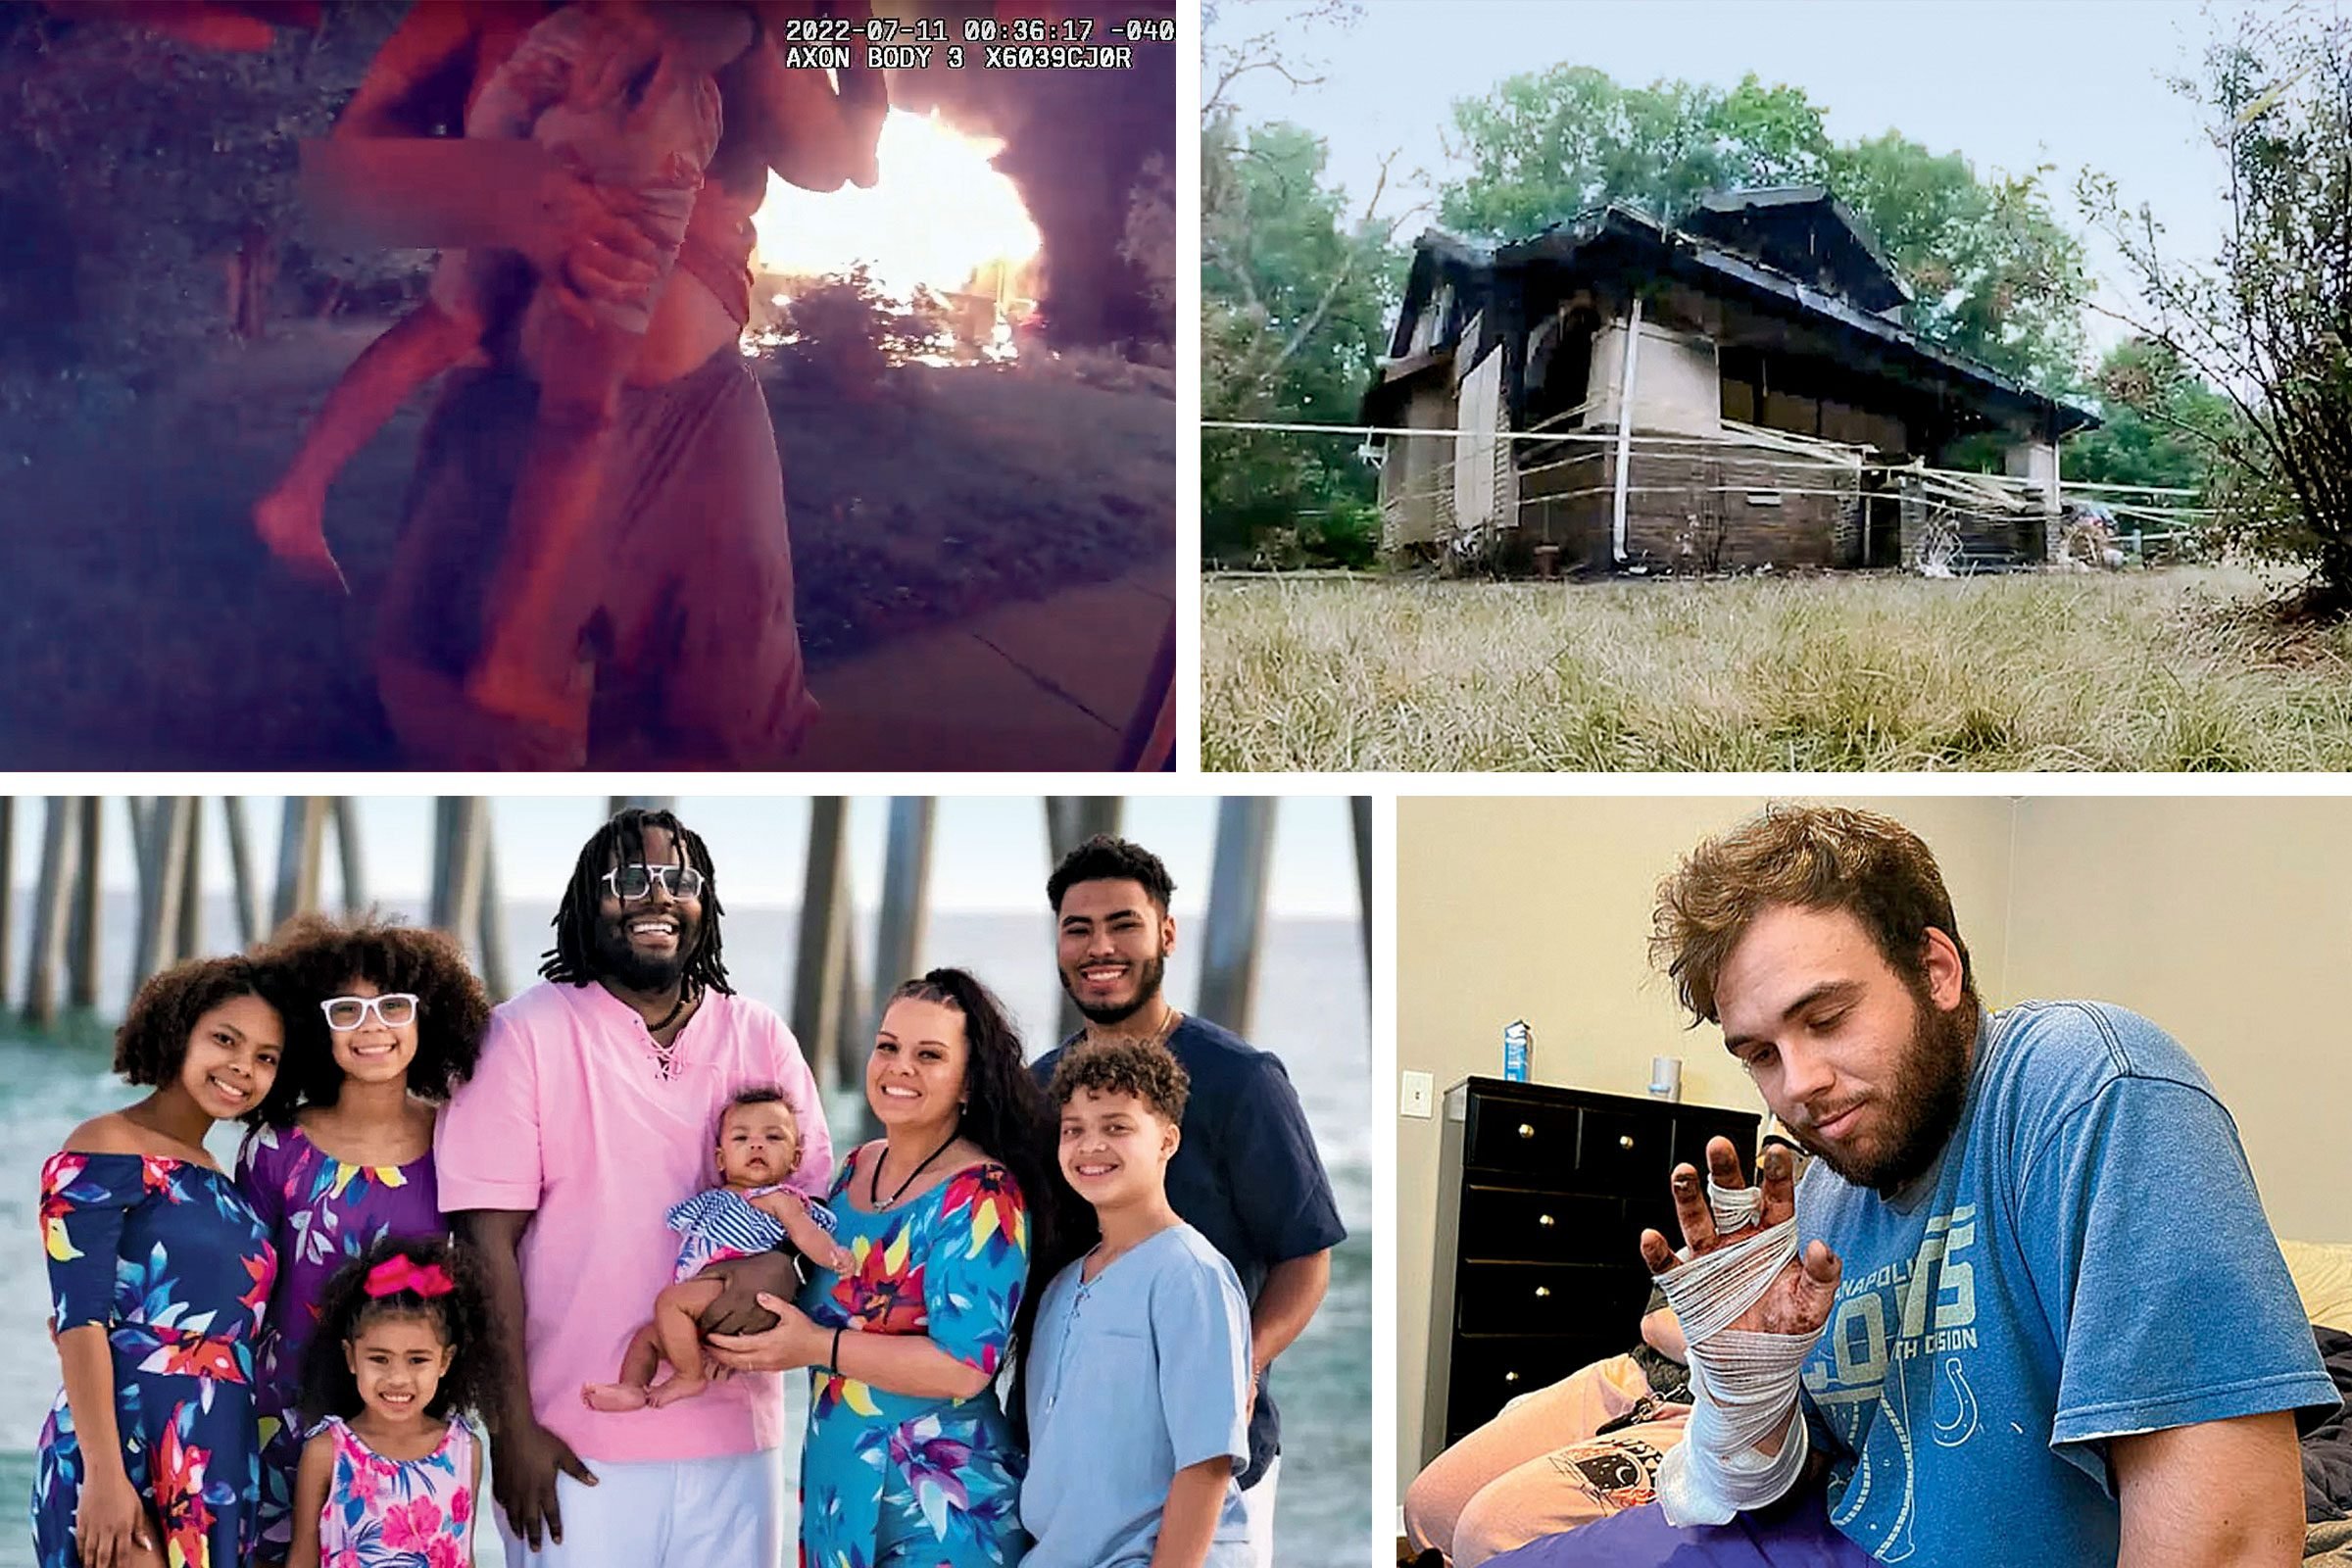 Clockwise from top left: A firefighter's bodycam showing Bostic and Kaylani; the destroyed house; Bostic recovering; Kaylani (with red bow) and her family